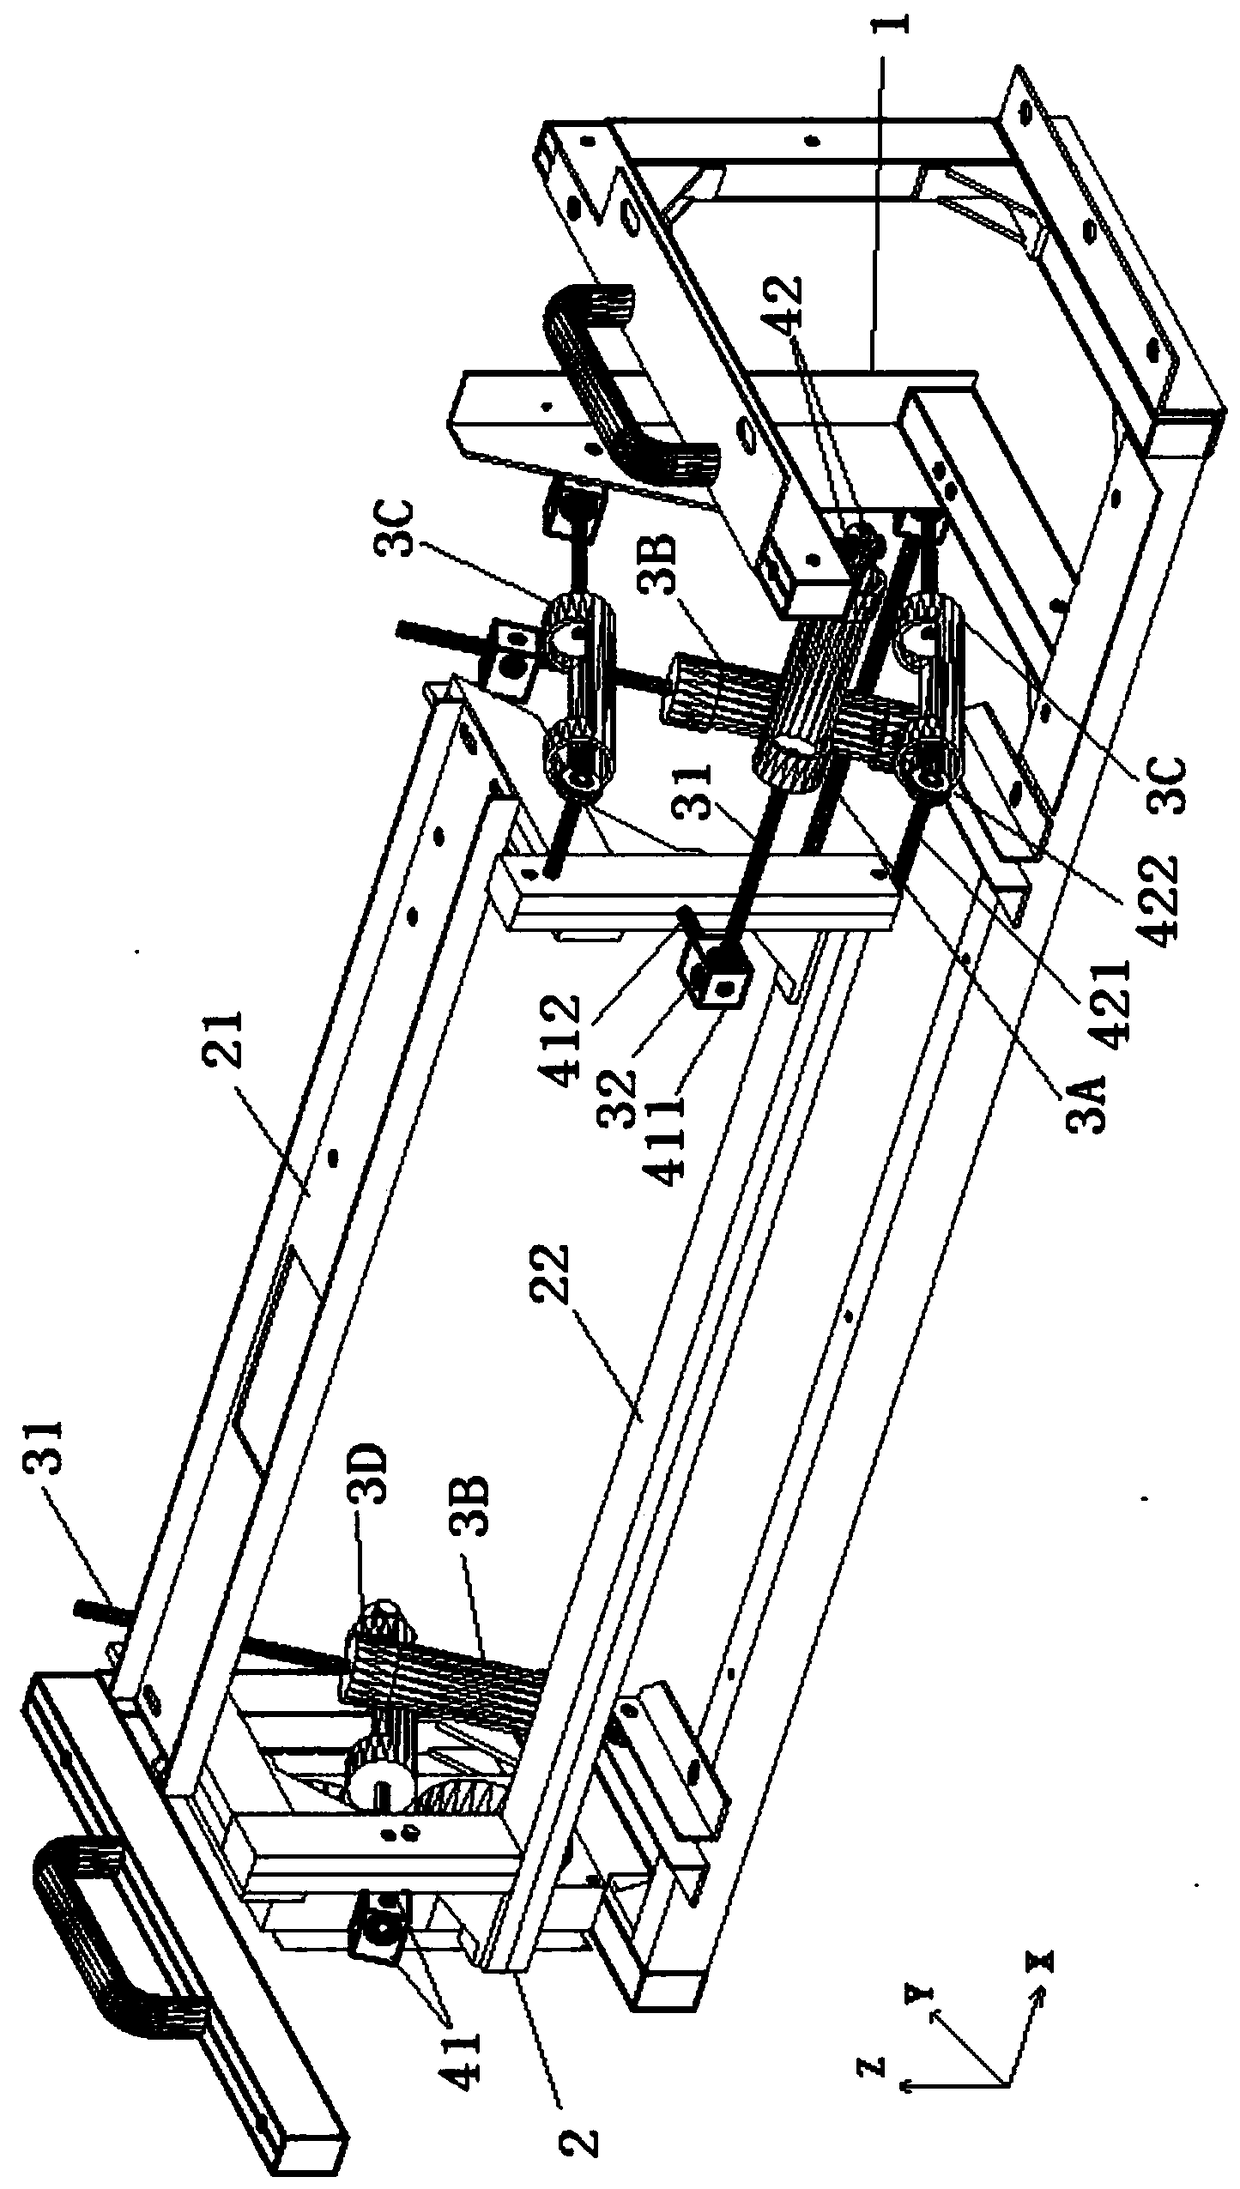 Inverted all-electric mechanical six-axis adjustment platform